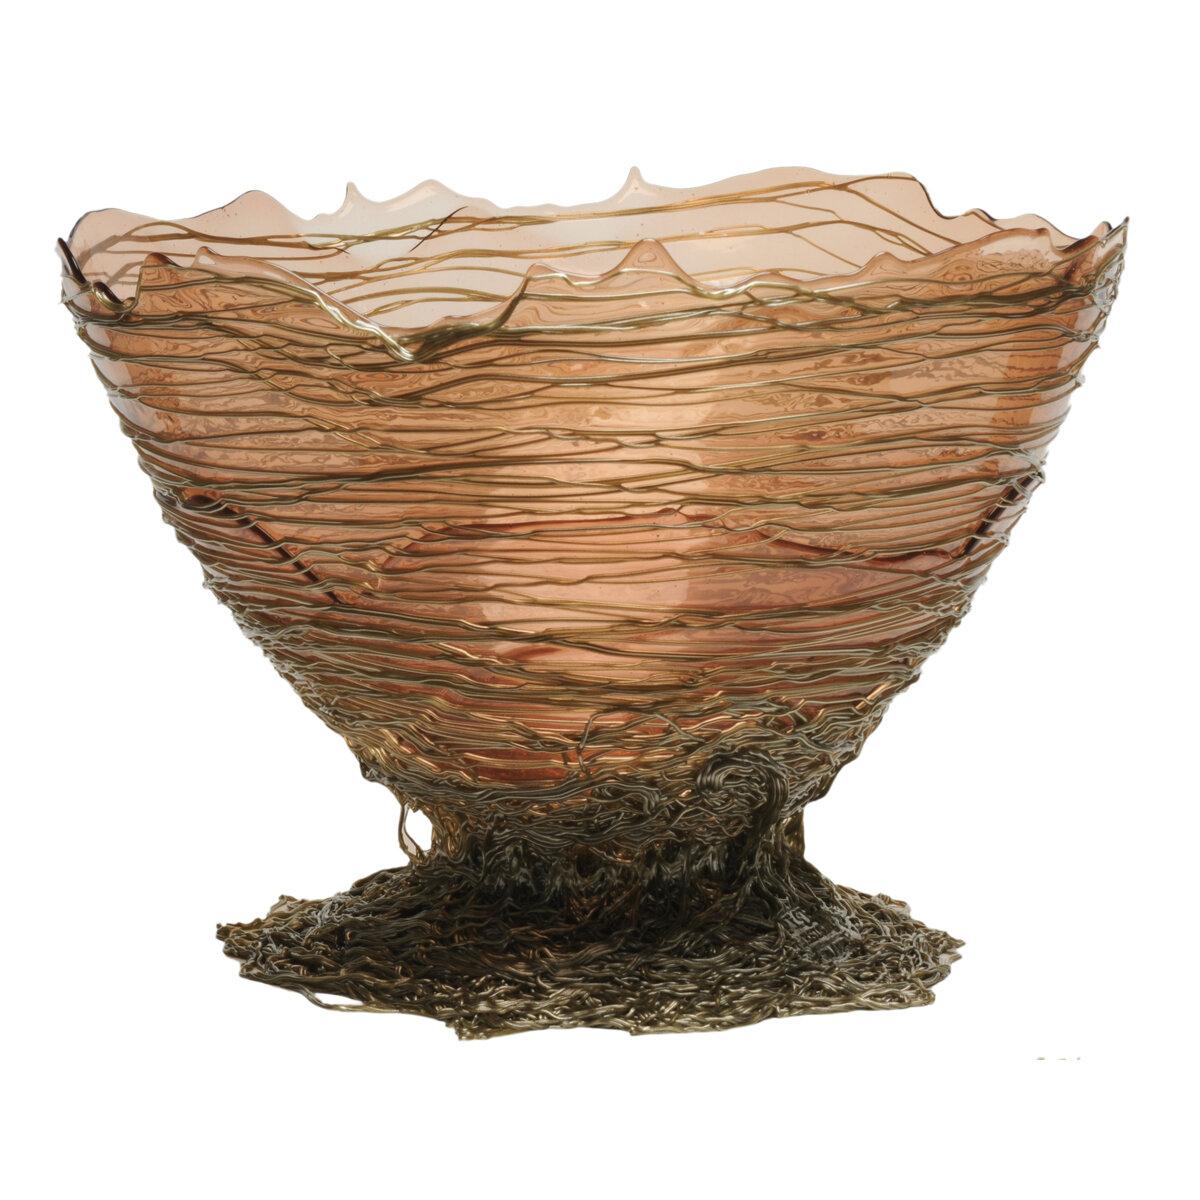 Contemporary Gaetano Pesce Ogiva L Vase Basket Resin Antique Pink Bronze In New Condition For Sale In barasso, IT